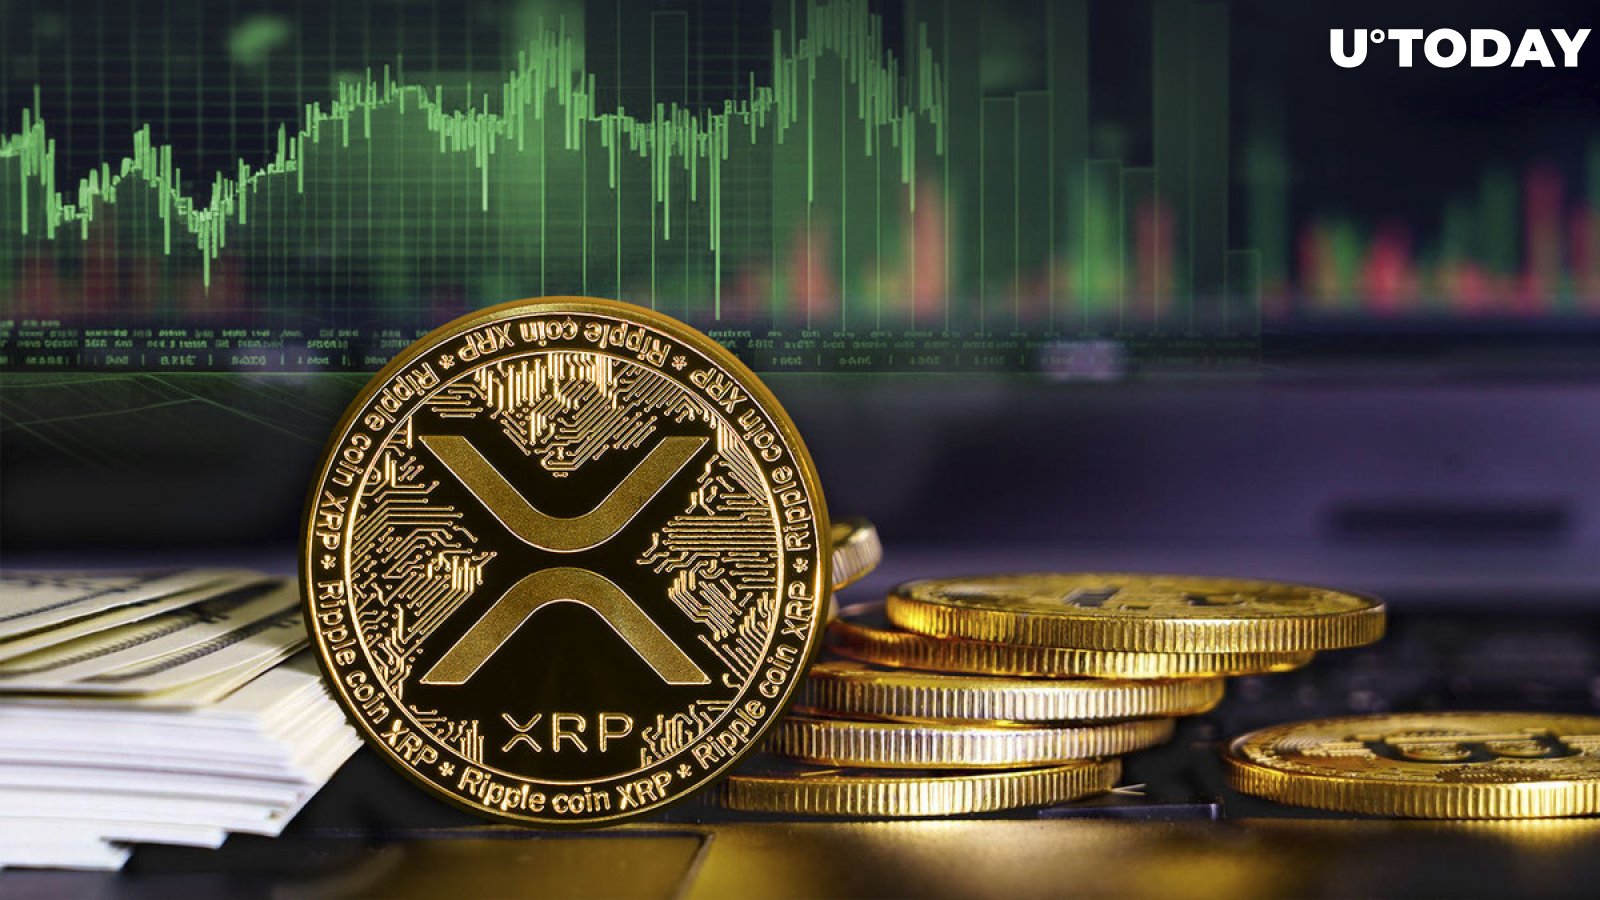 XRP Achieves New Milestone of 5.2 Million Active Wallets